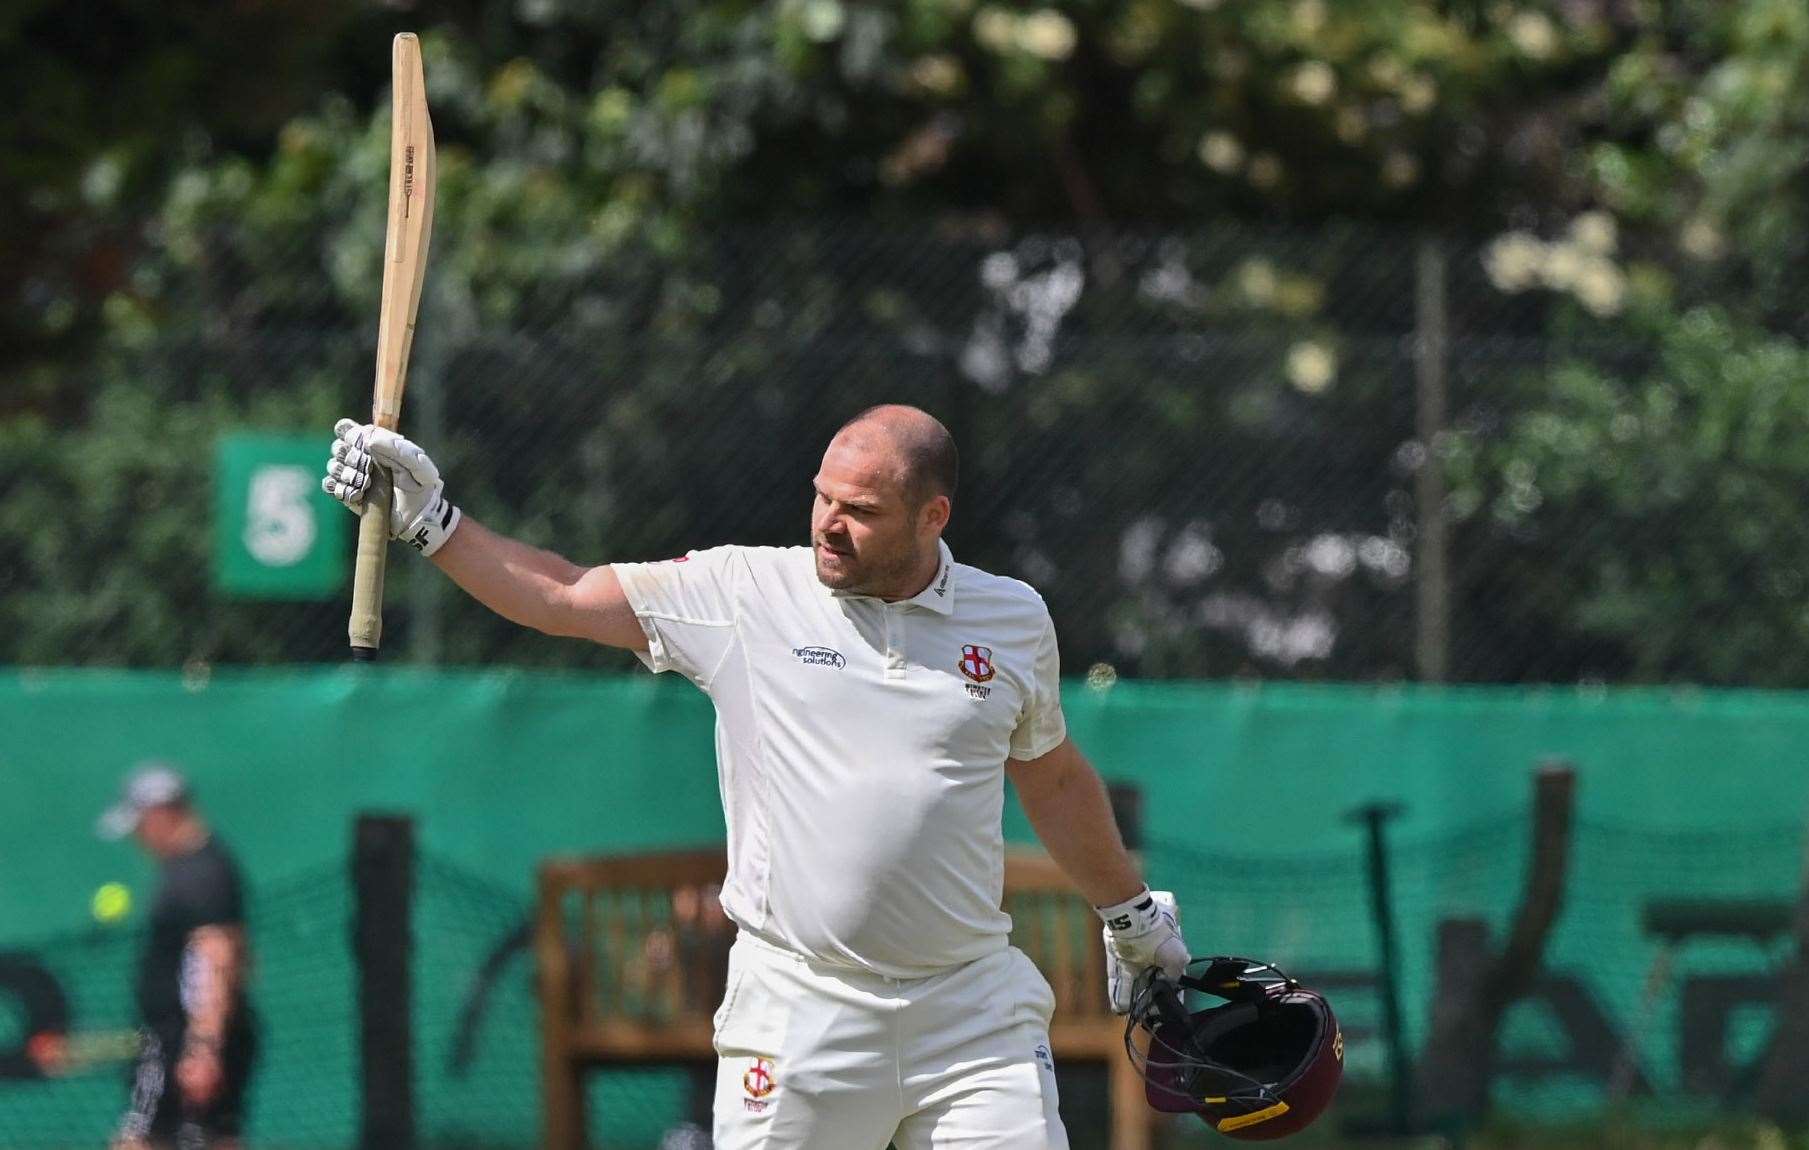 Opener James Thompson was in great form, blasting an unbeaten century, as second-placed Minster ended their season with a win over relegated Beckenham. Picture: Keith Gillard